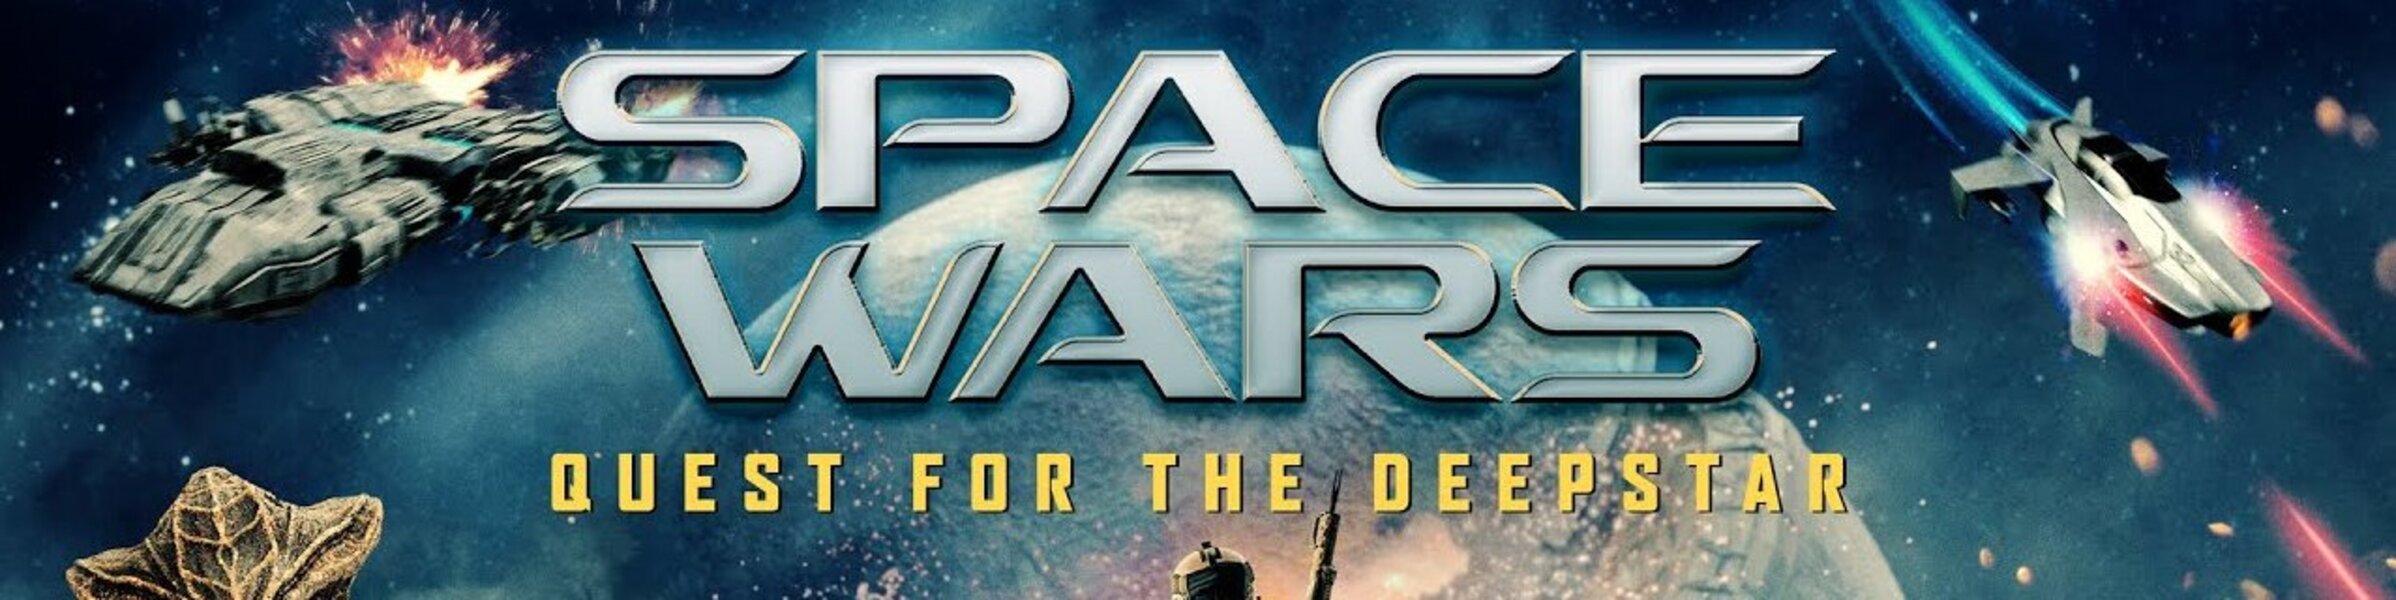 SPACE WARS: QUEST FOR THE DEEPSTAR